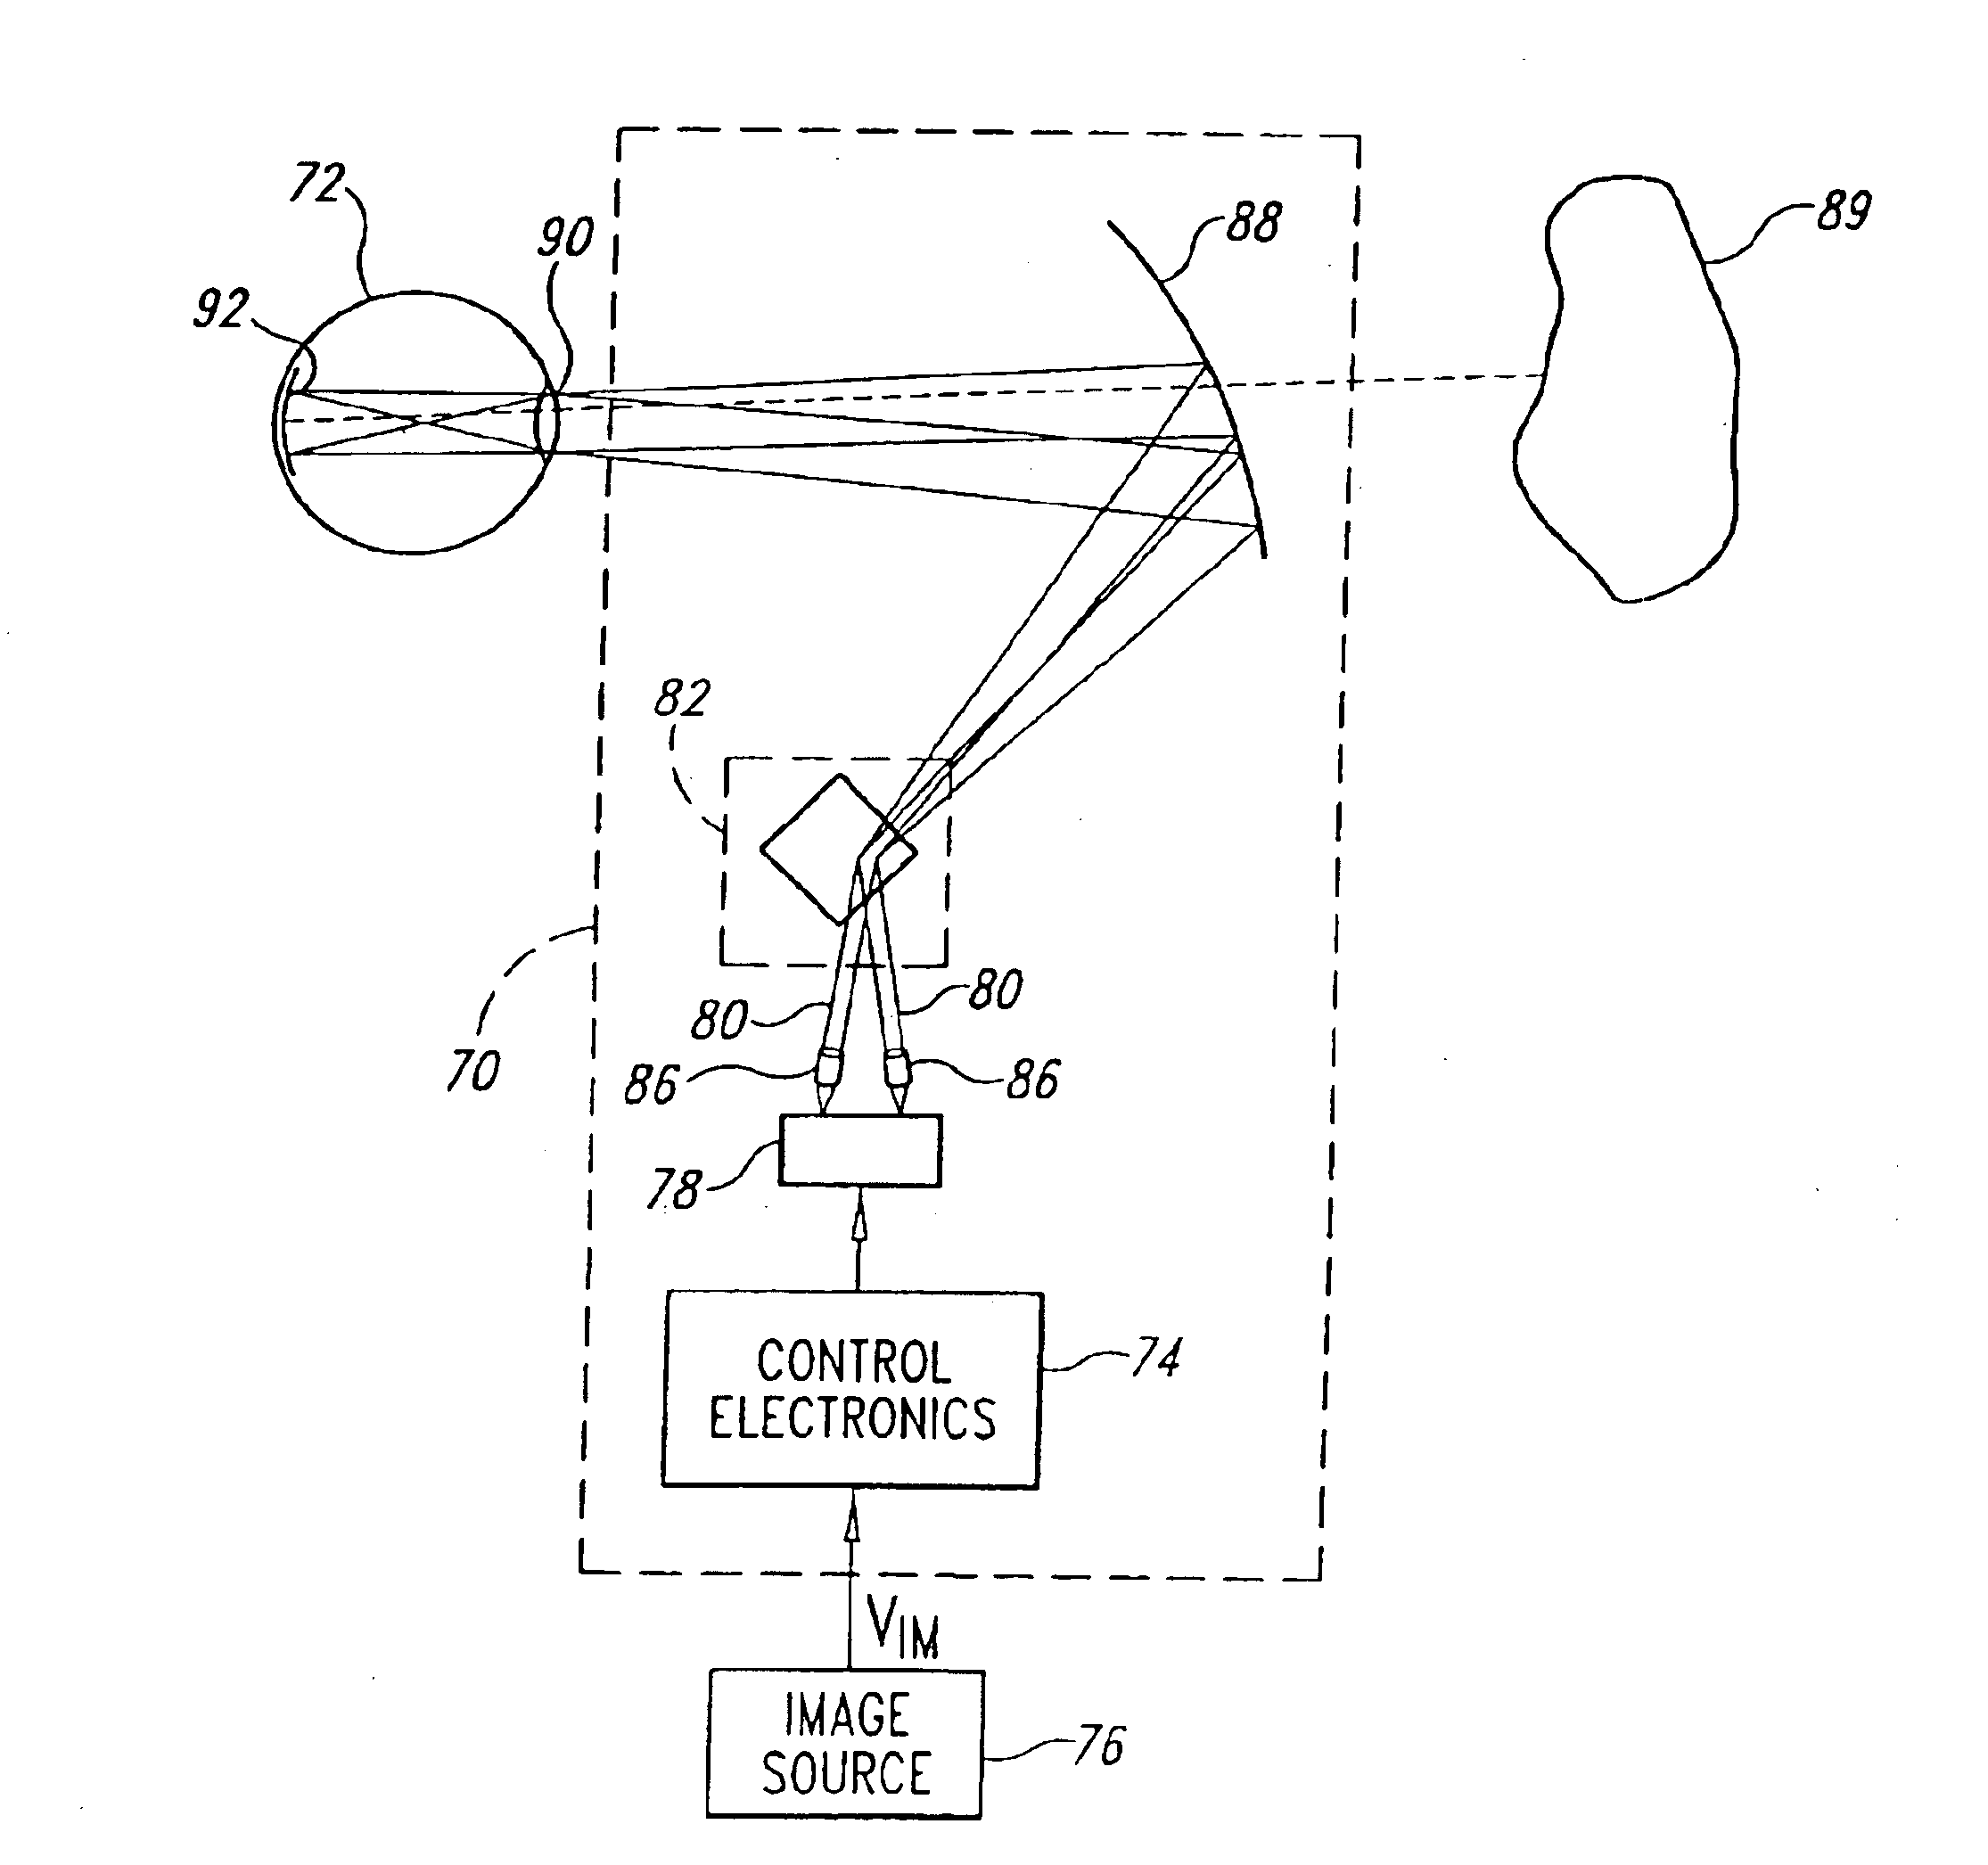 Resonant scanner with asymmetric mass distribution